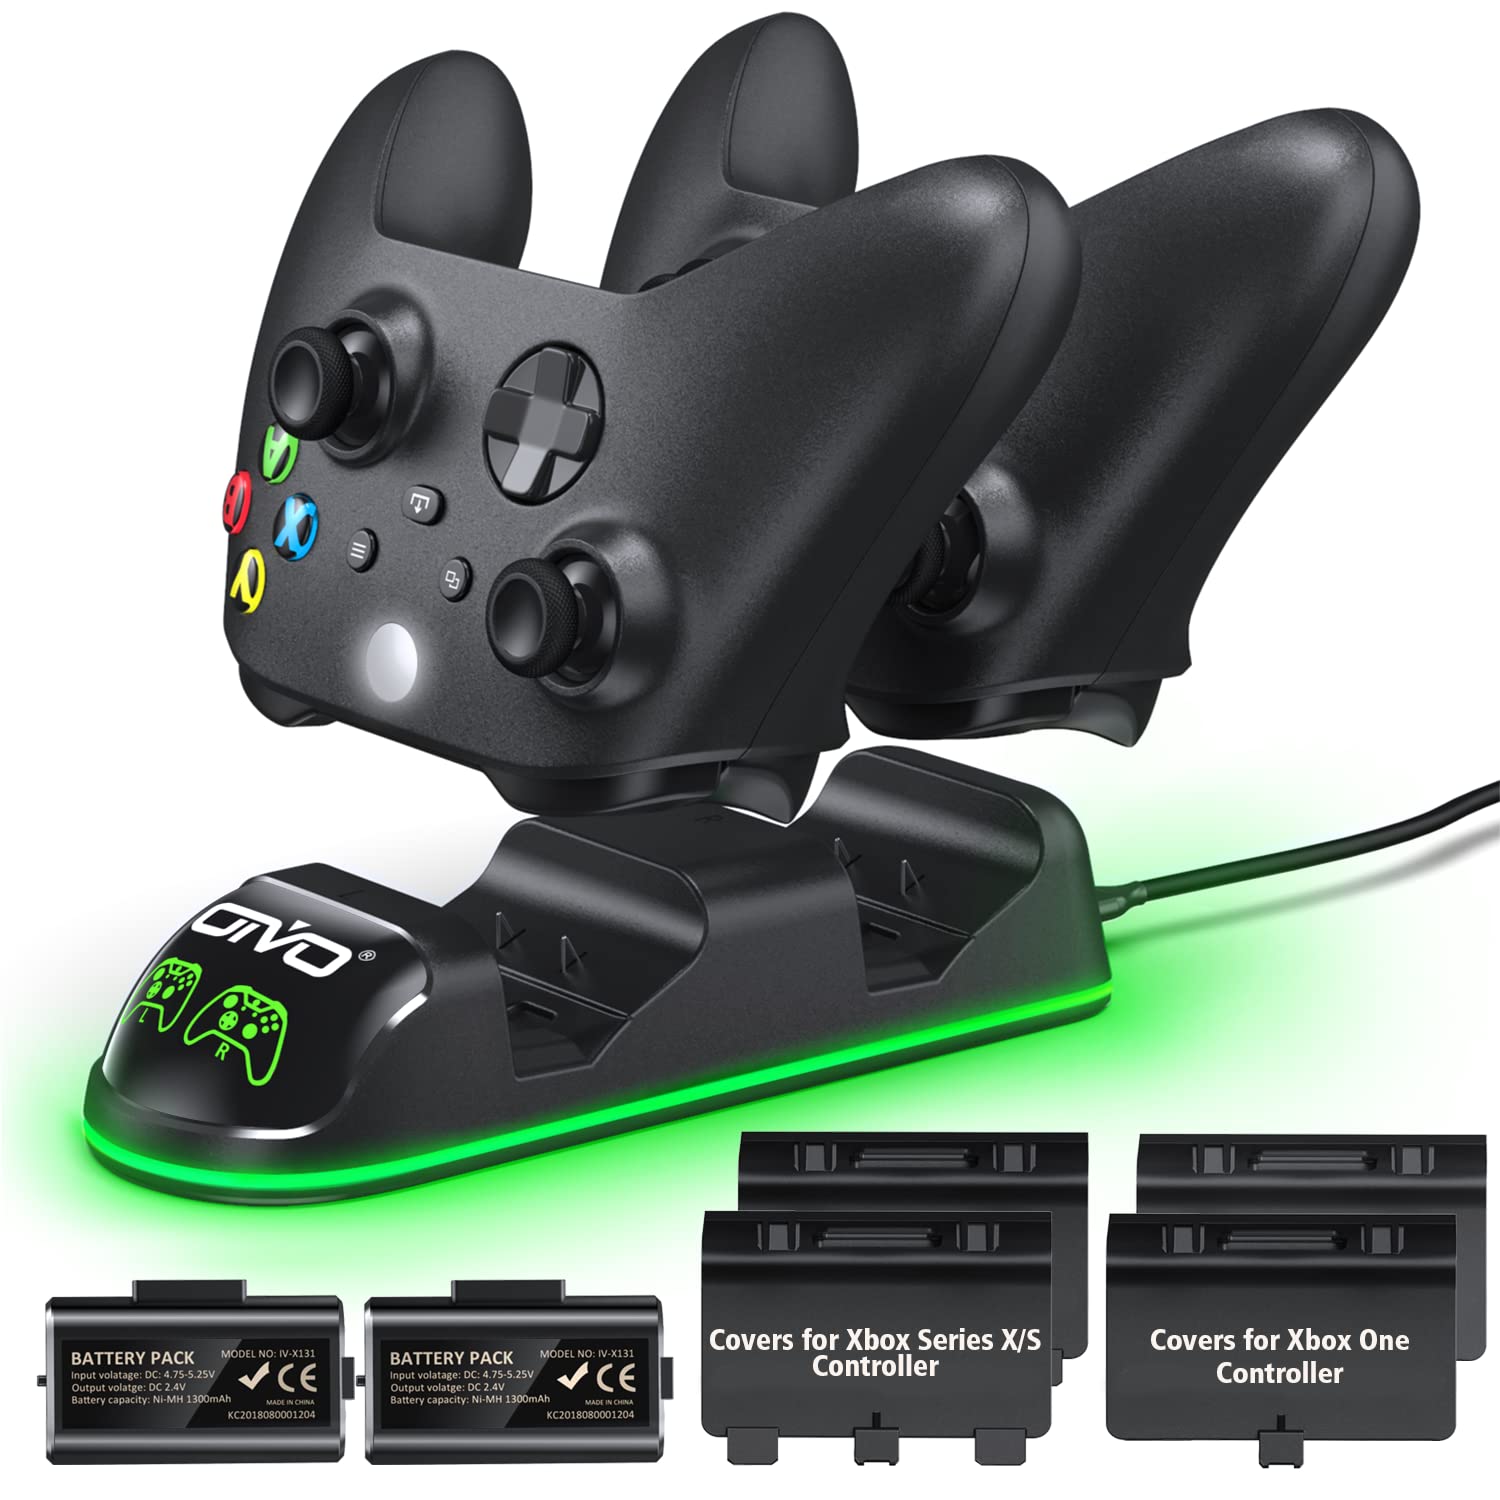 OIVO XSX Controller Charger Station with 2 Packs 1300mAh Rechargeable Battery $9.99 for Prime